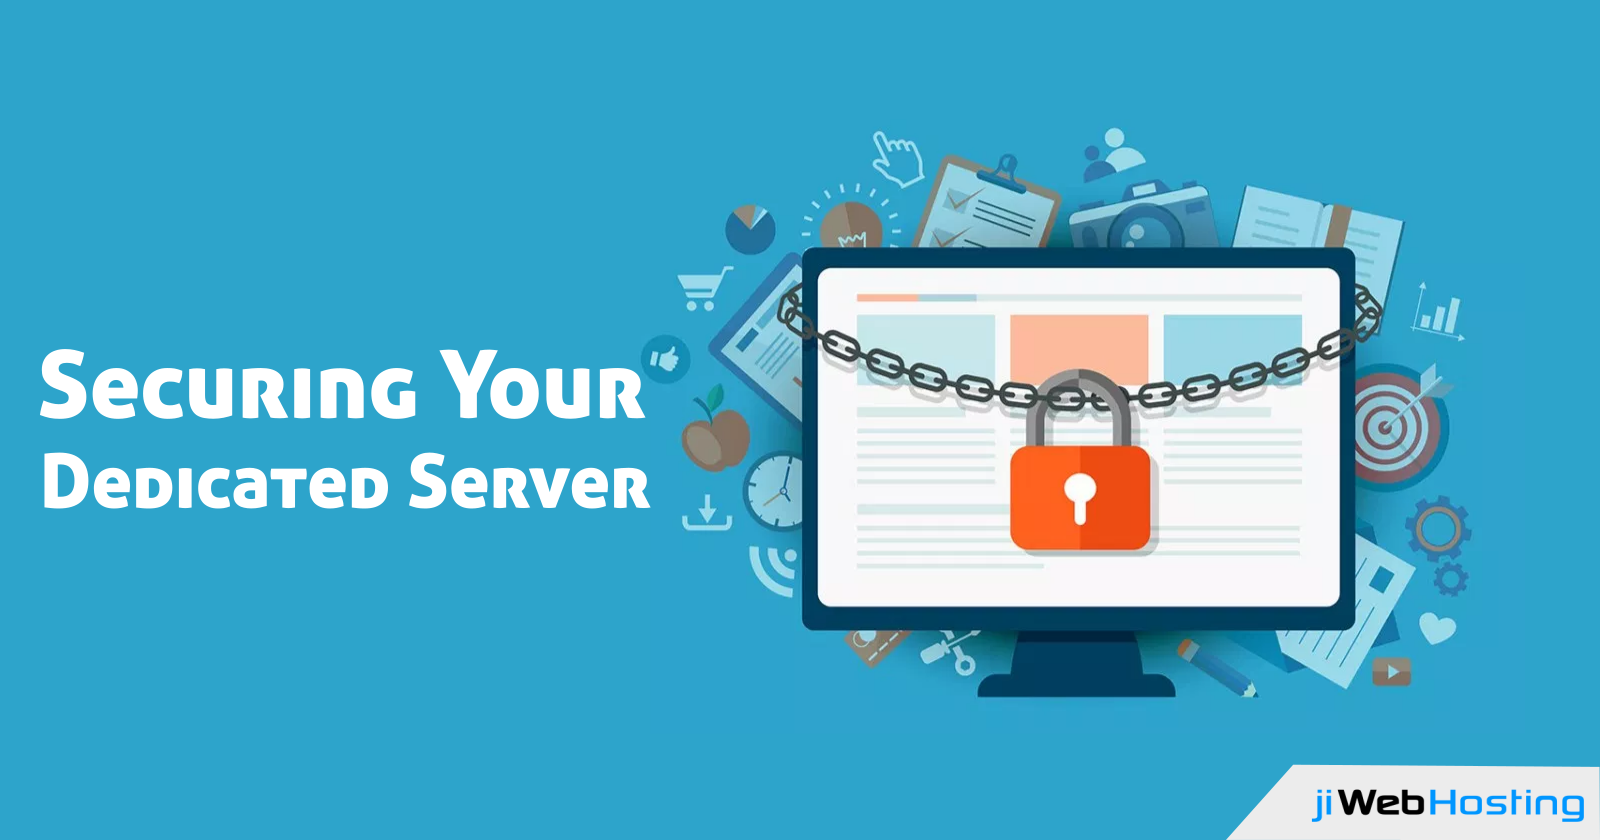 3 Security Threats to Your Dedicated Server You Should Know